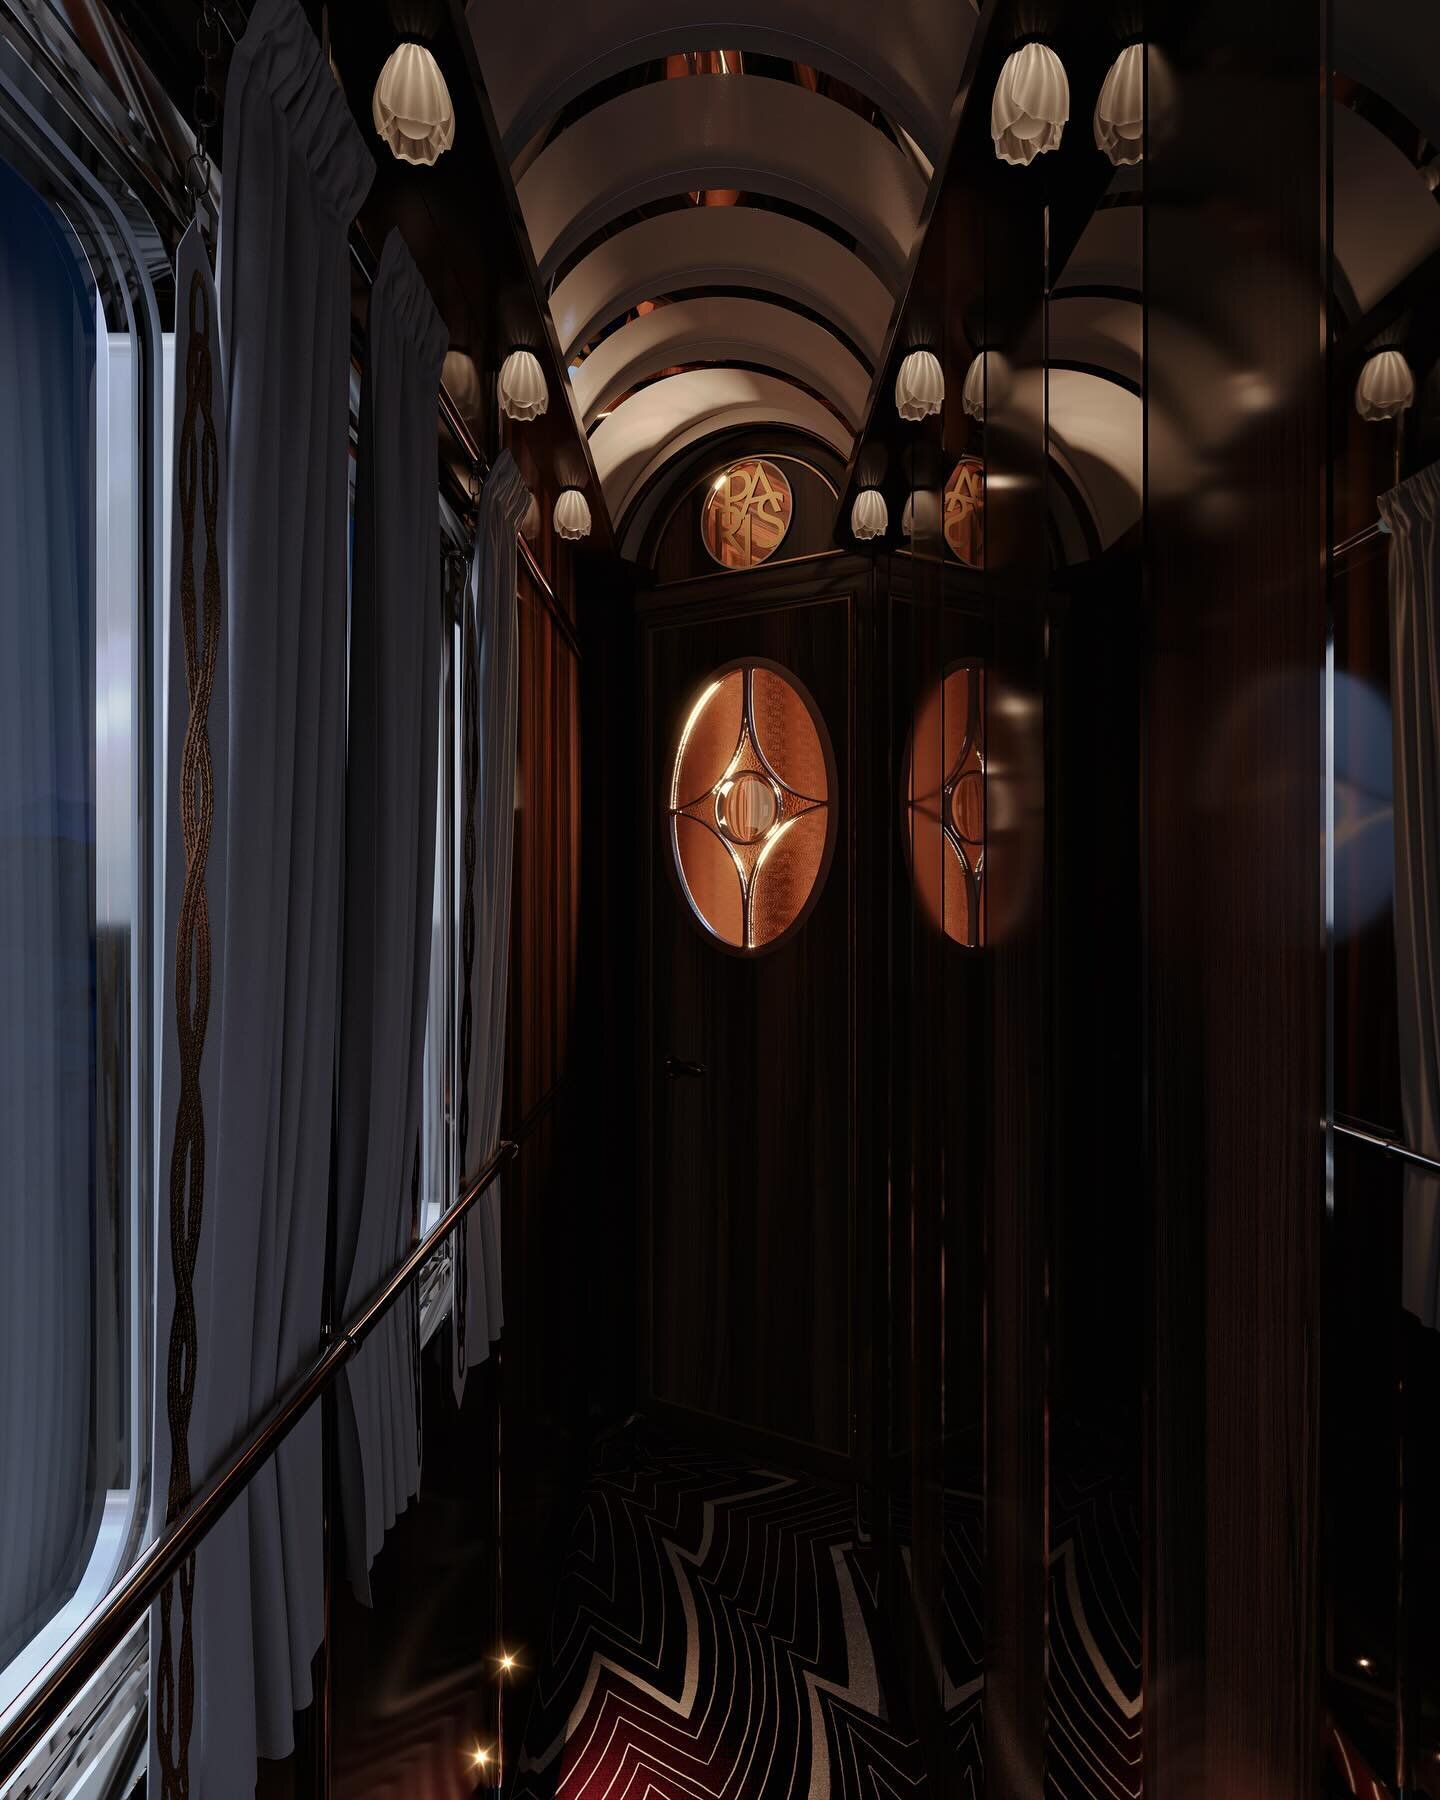 Wandering along the future #orientexpress train hallways. A  real-life fairy tale experience designed by @maximedangeac 

#travel #train #dream #wonders #3drendering #nightscape #hallway